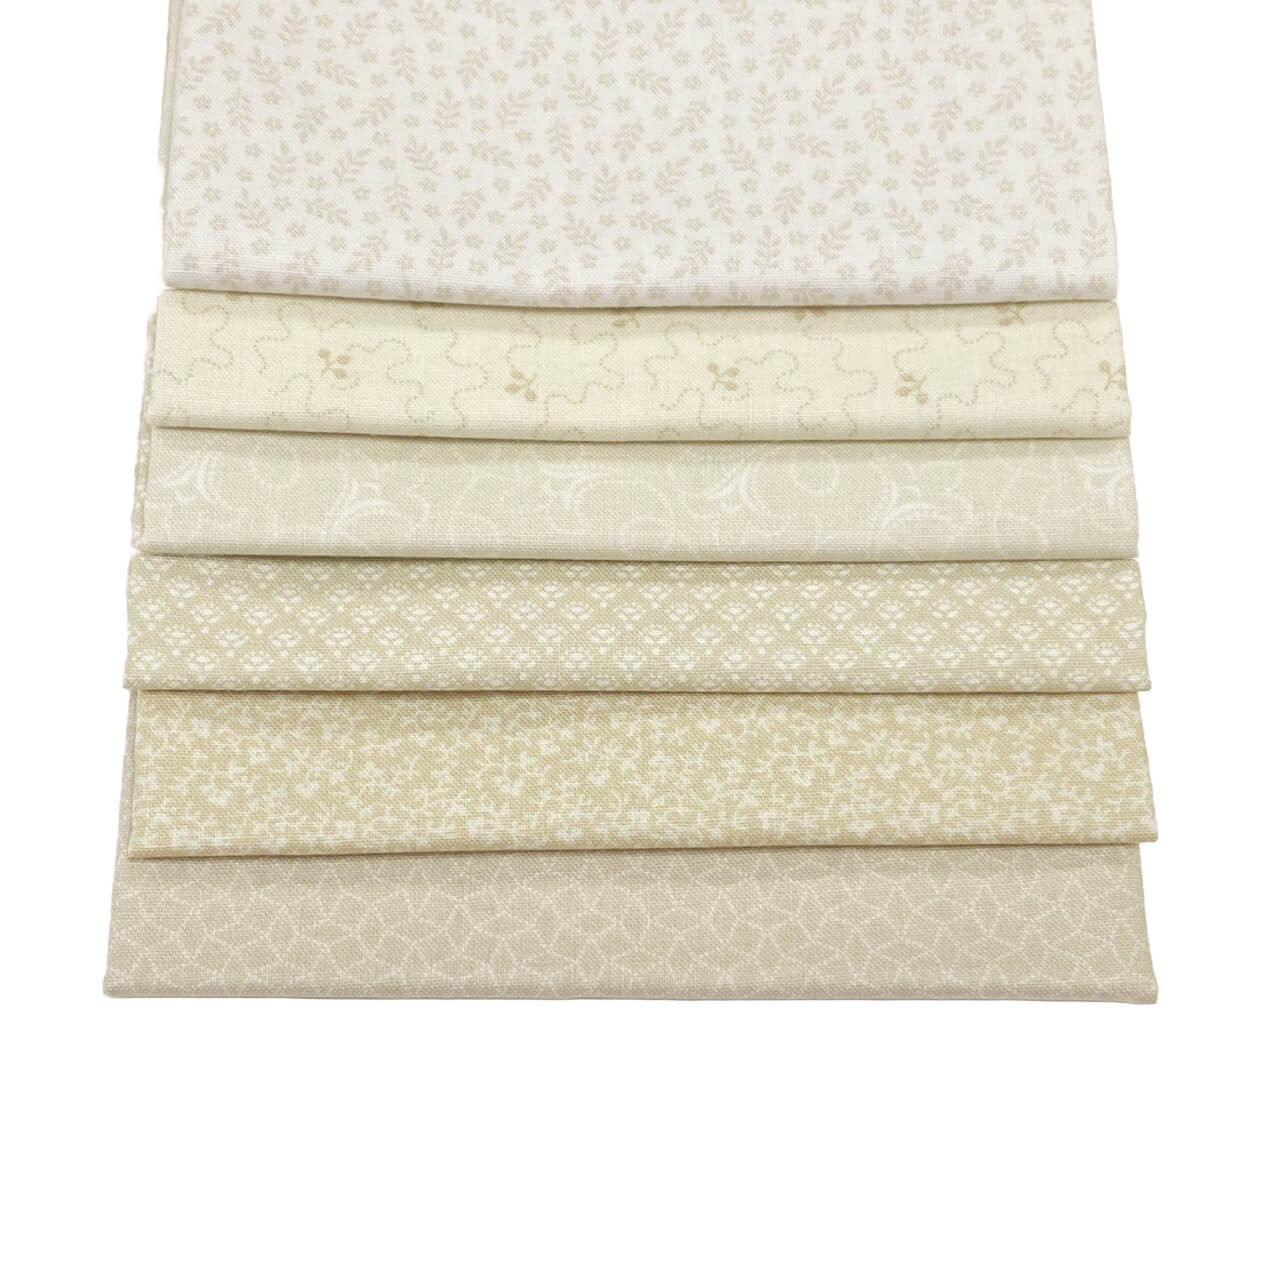 This image shows the 6 fat quarter fabrics from the Creme Fraiche colourway in the Tonal Ditzy Collection.